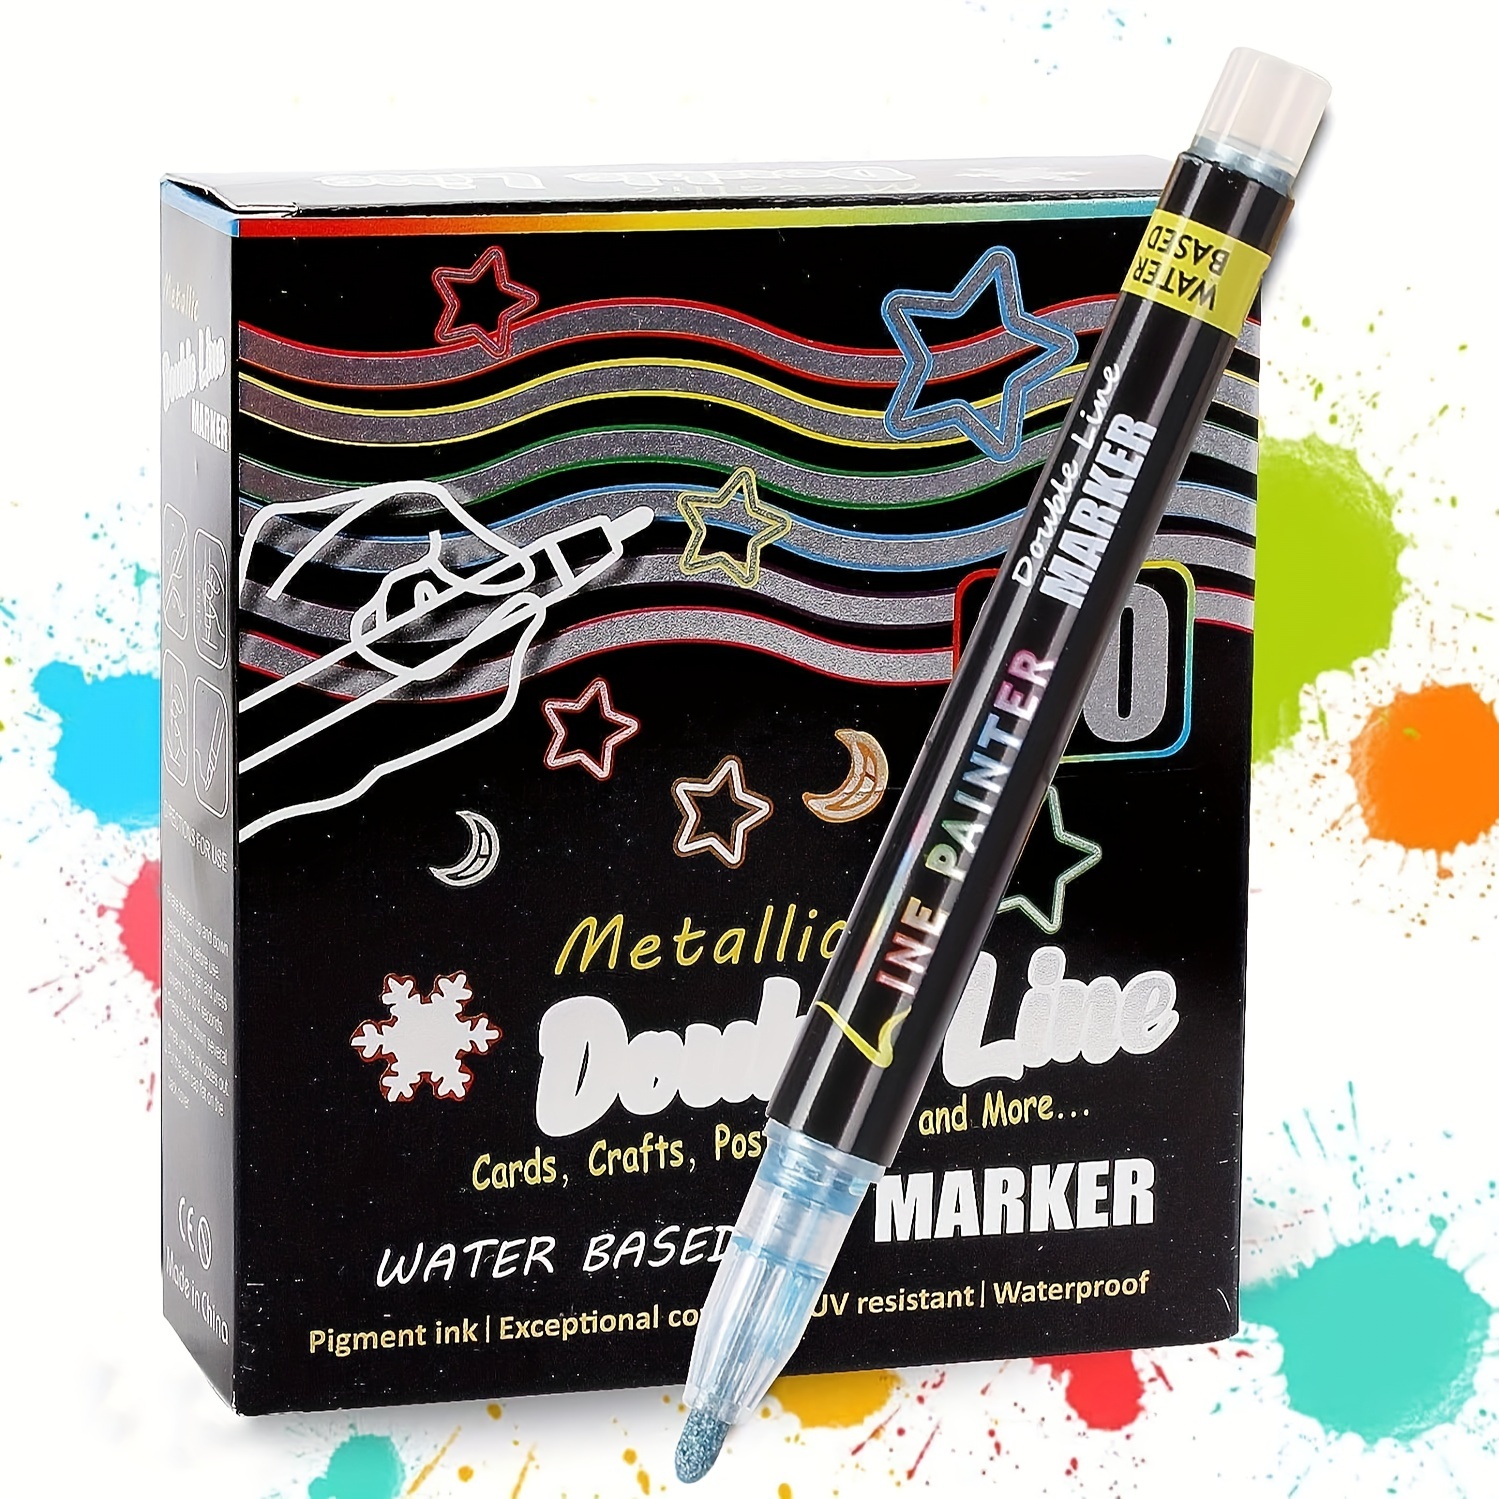  Shimmer Markers Double Line Outline: 20 Colors Metallic  Glitter Pen Set Super Squiggles Sparkle Kid Age 4 8 10 12 24 Christmas Gift  Cool Dazzles Dazzlers Self Sparkly Doodle Supplies